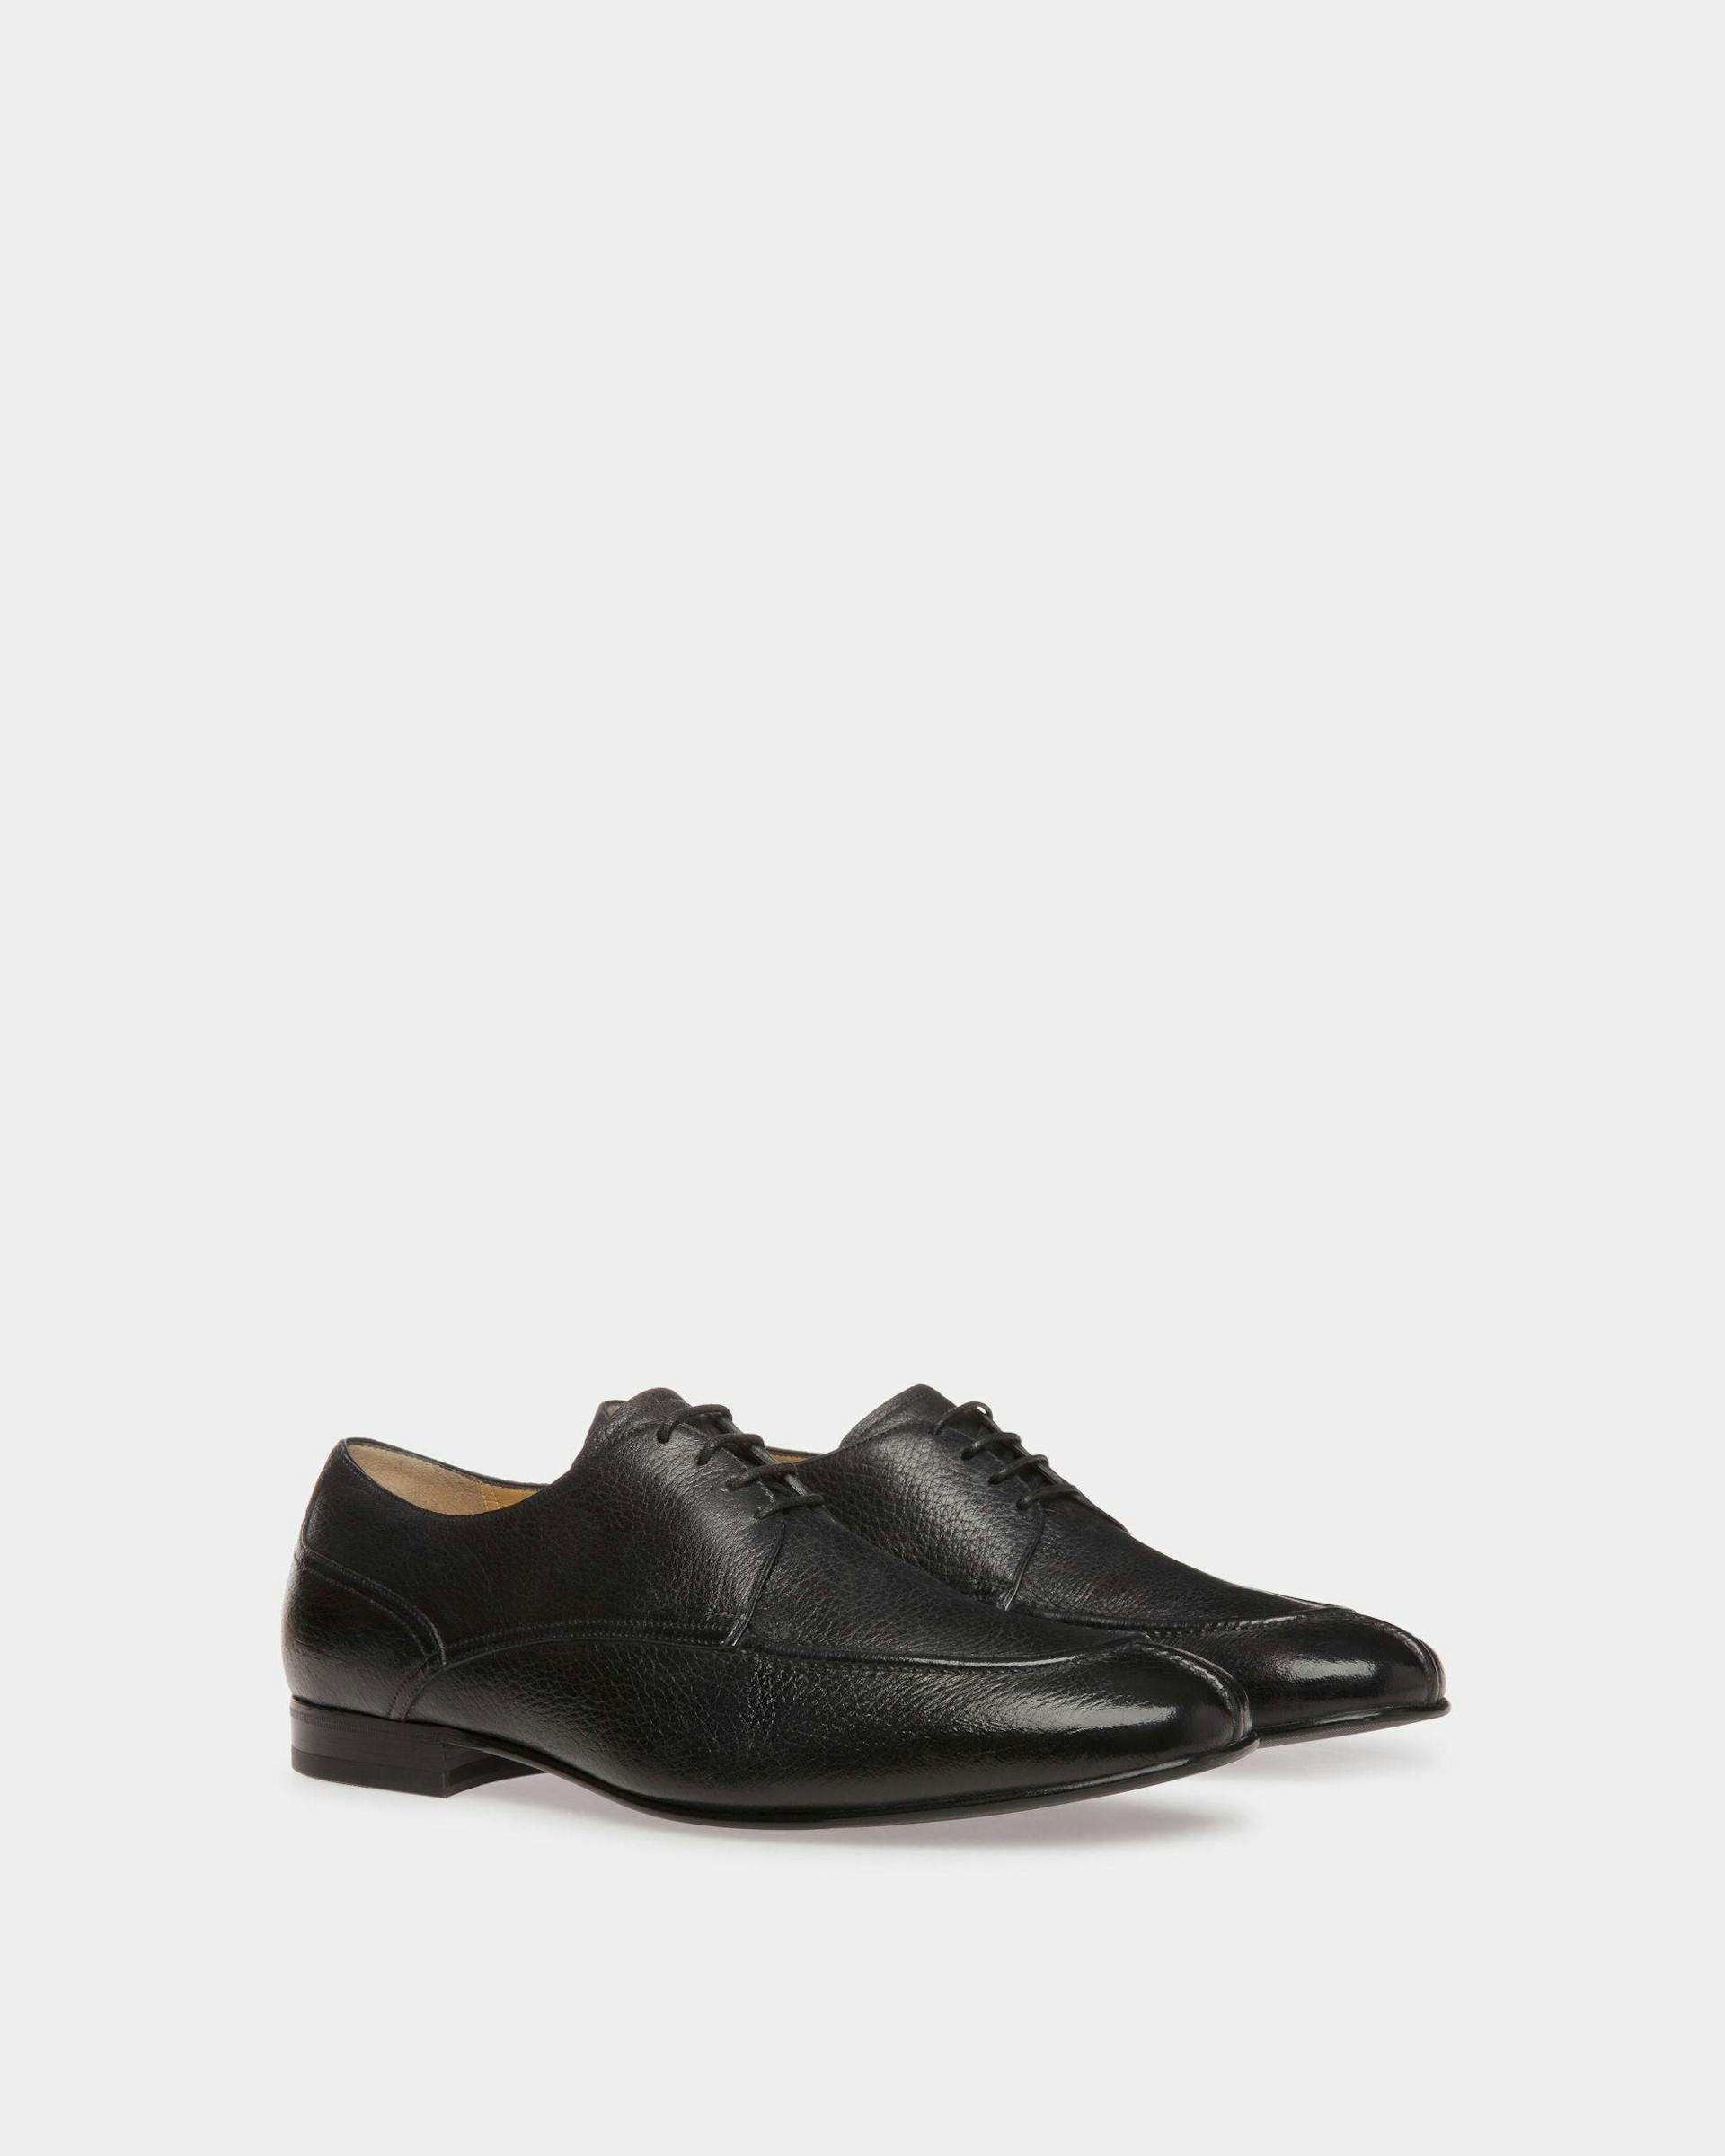 Saele | Men's Derby Shoes | Black Leather | Bally